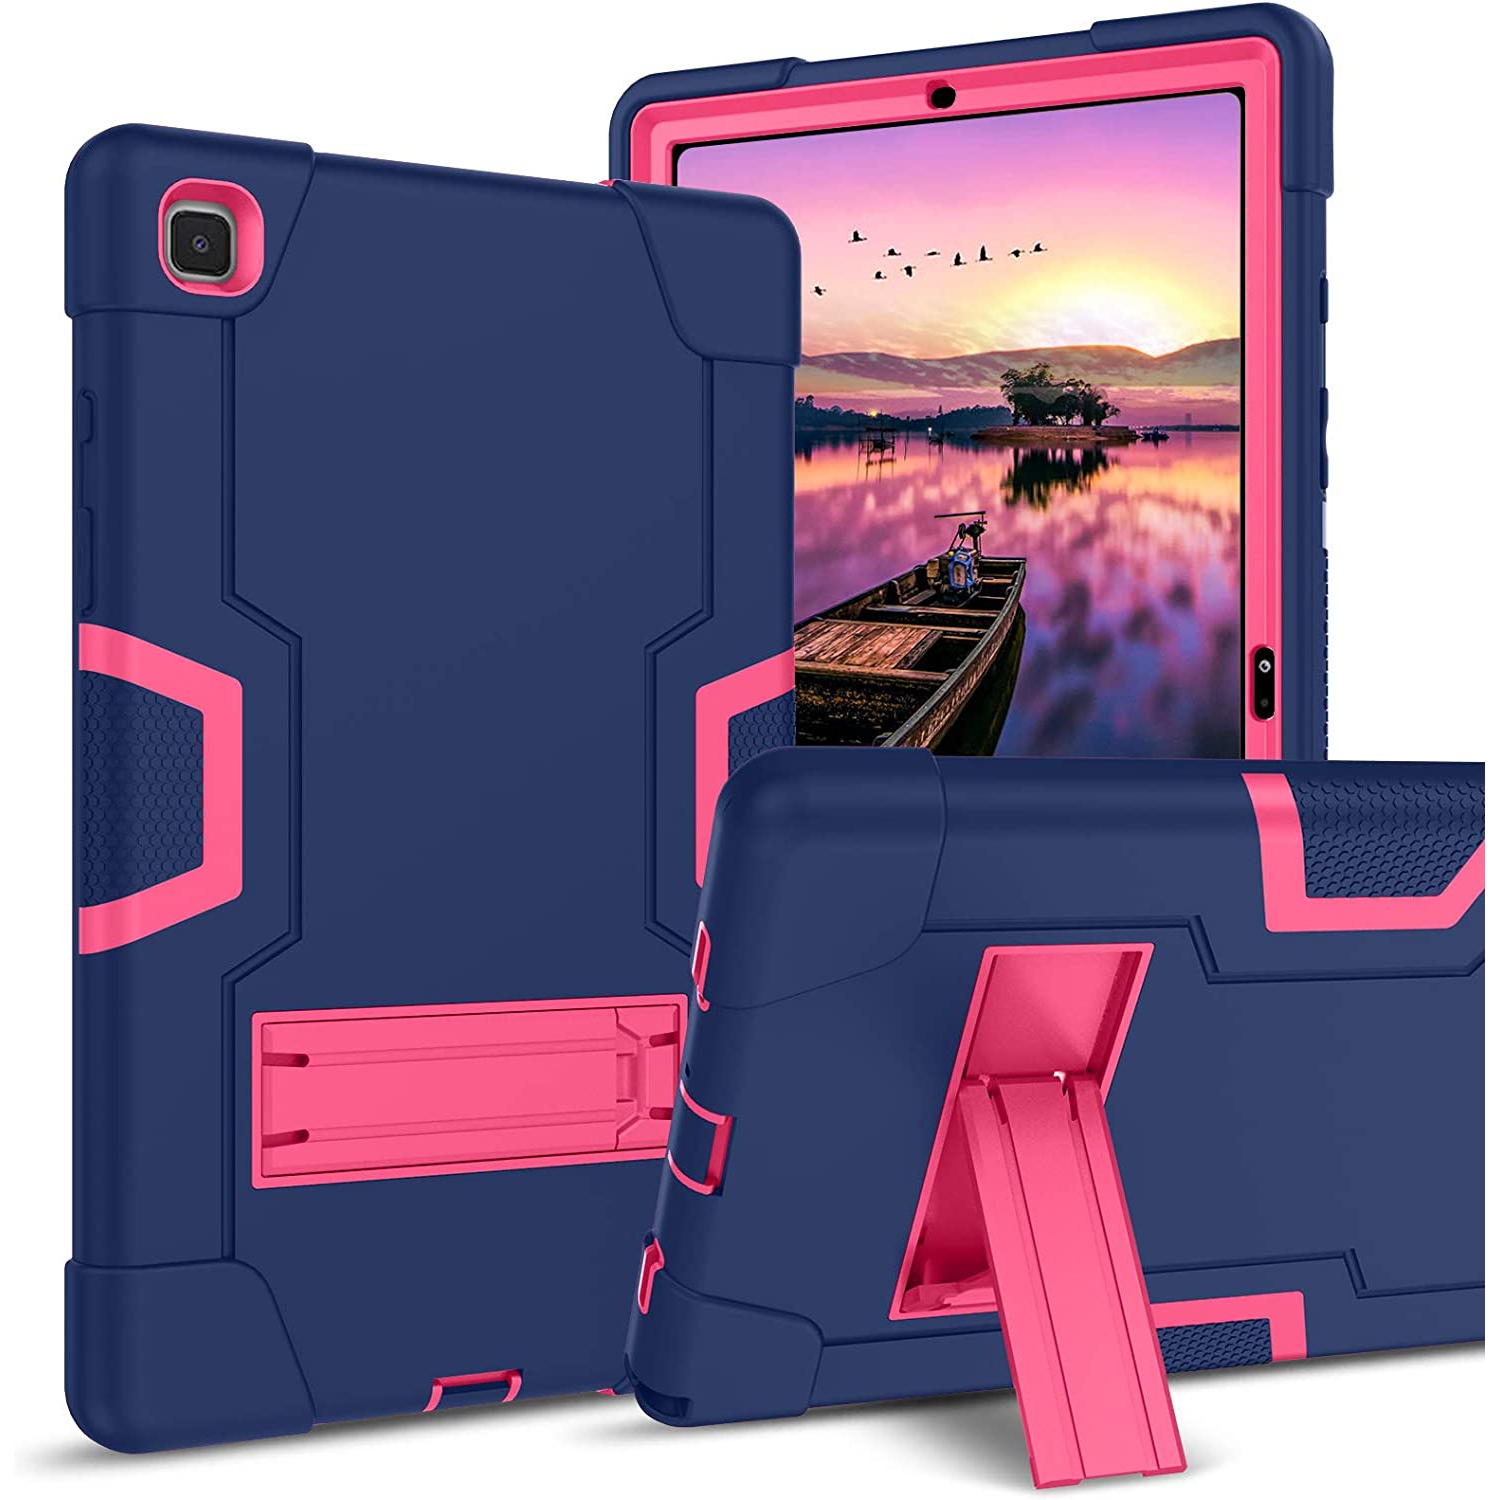 G Galaxy Tab A7 10.4 2020 Case SM-T500 T505 T507 Kickstand Hybrid 3 in 1 Heavy Duty Rugged Full Body Cover for Kids Shockproof Protective Tablet Case for Samsung Galaxy Tab A7 2020